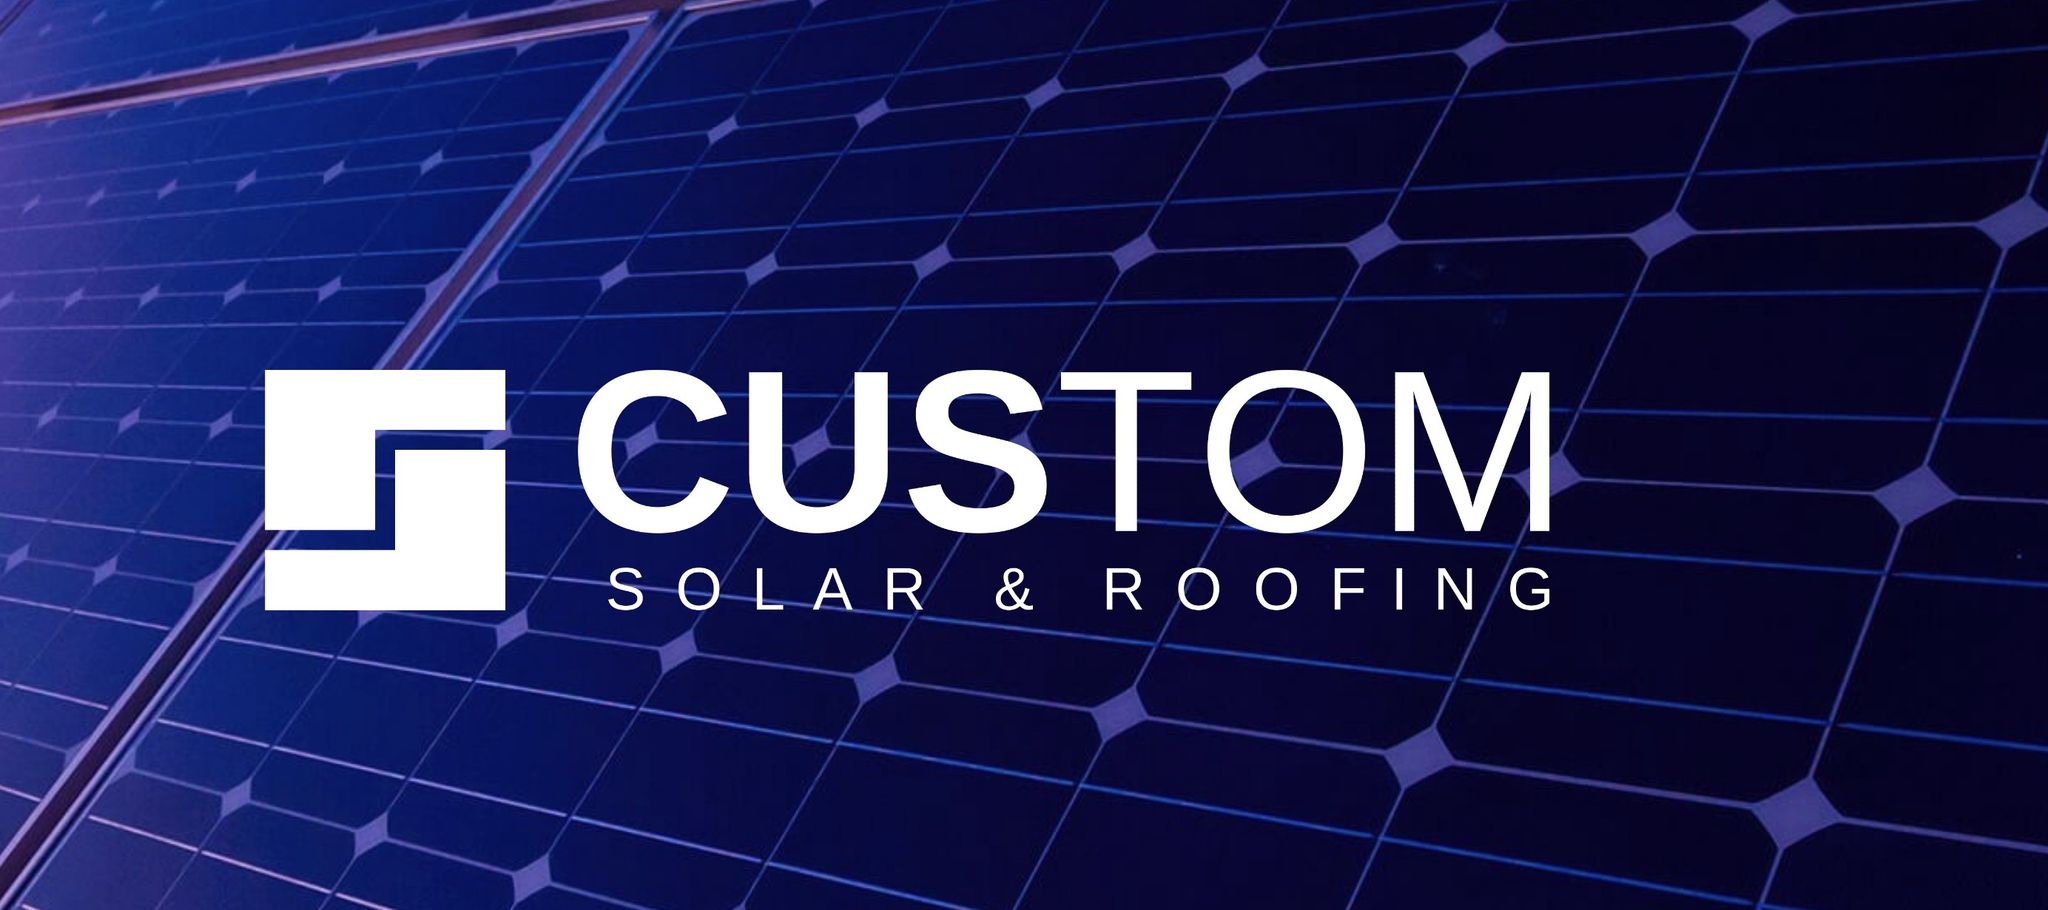 Custom Solar & Roofing featured image